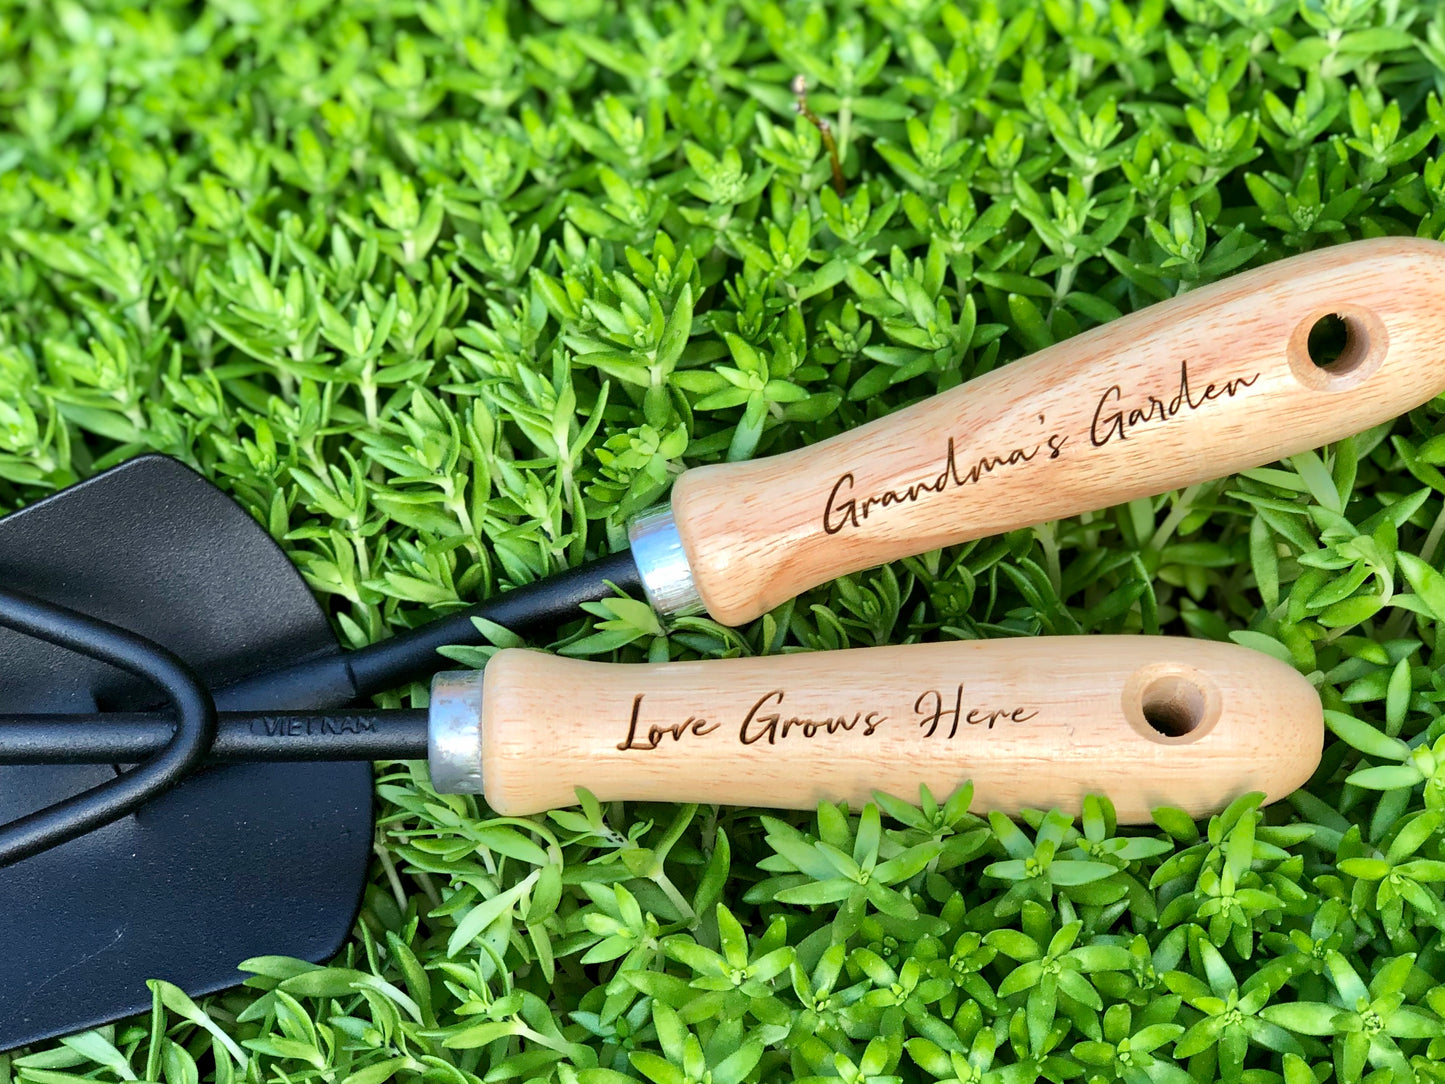 Personalized Gardening Tools